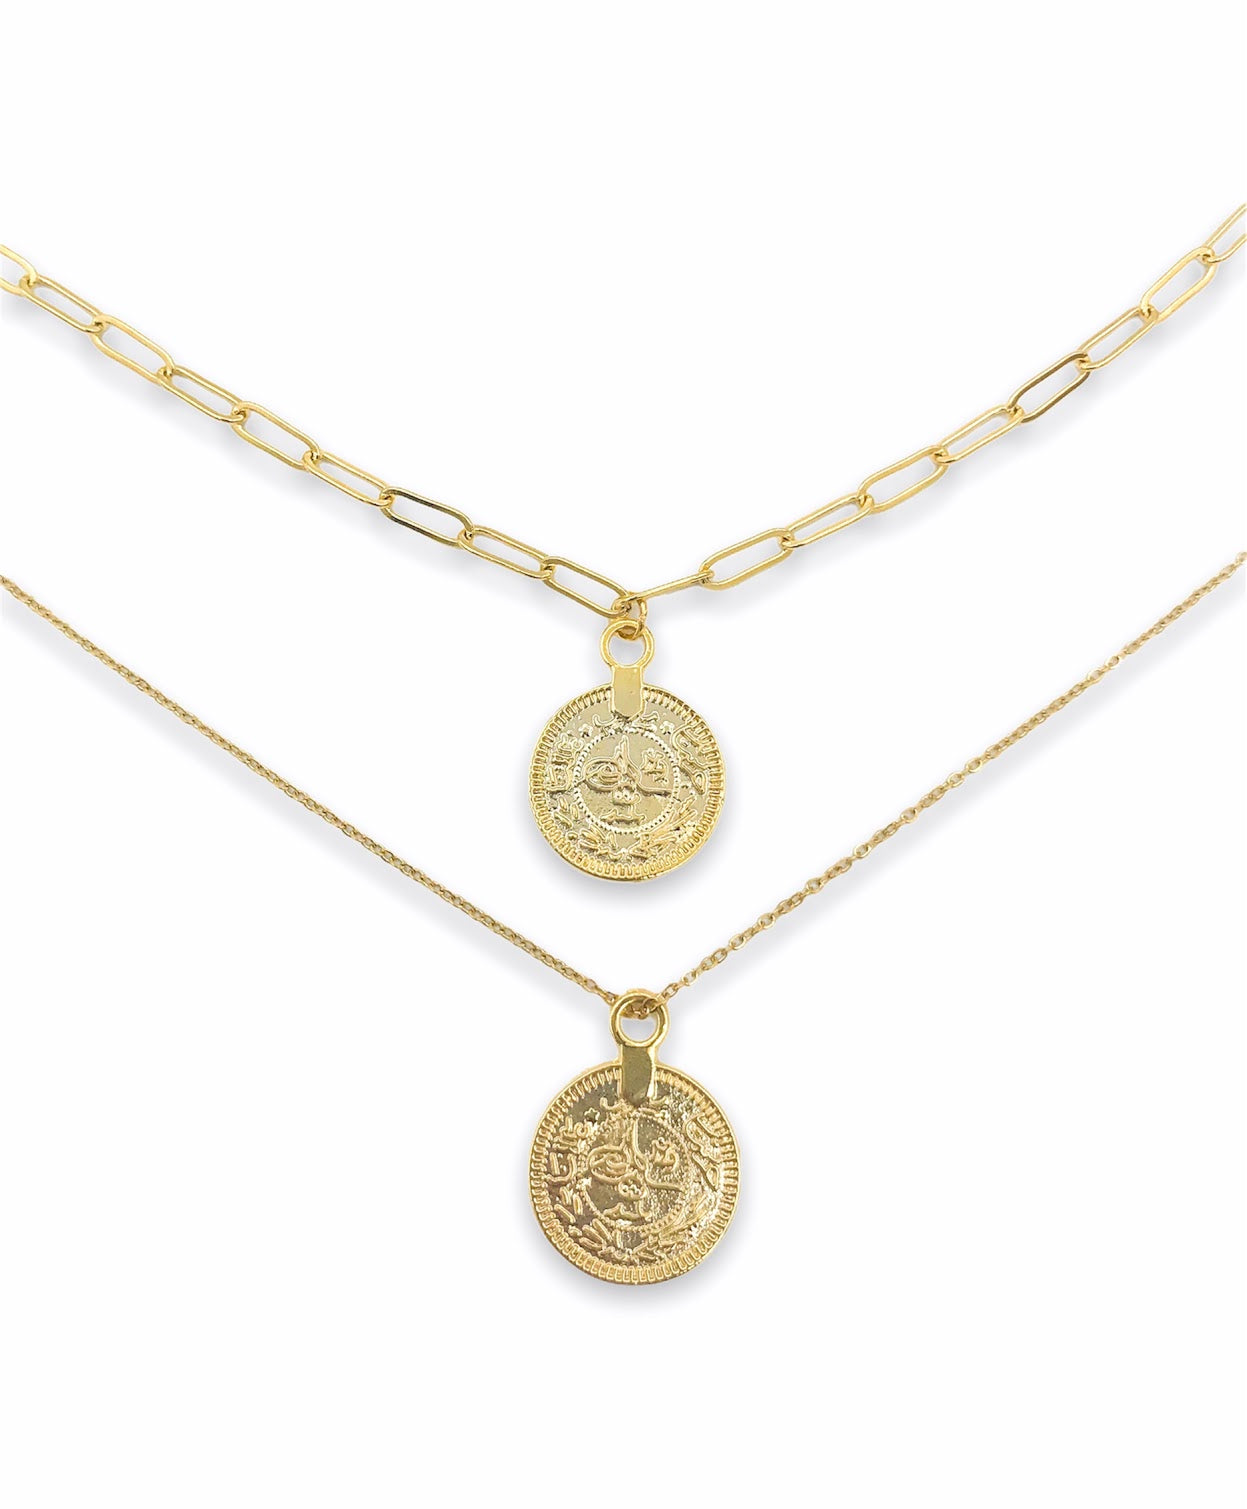 trendy jewelry fashion gold roman coin necklace chain